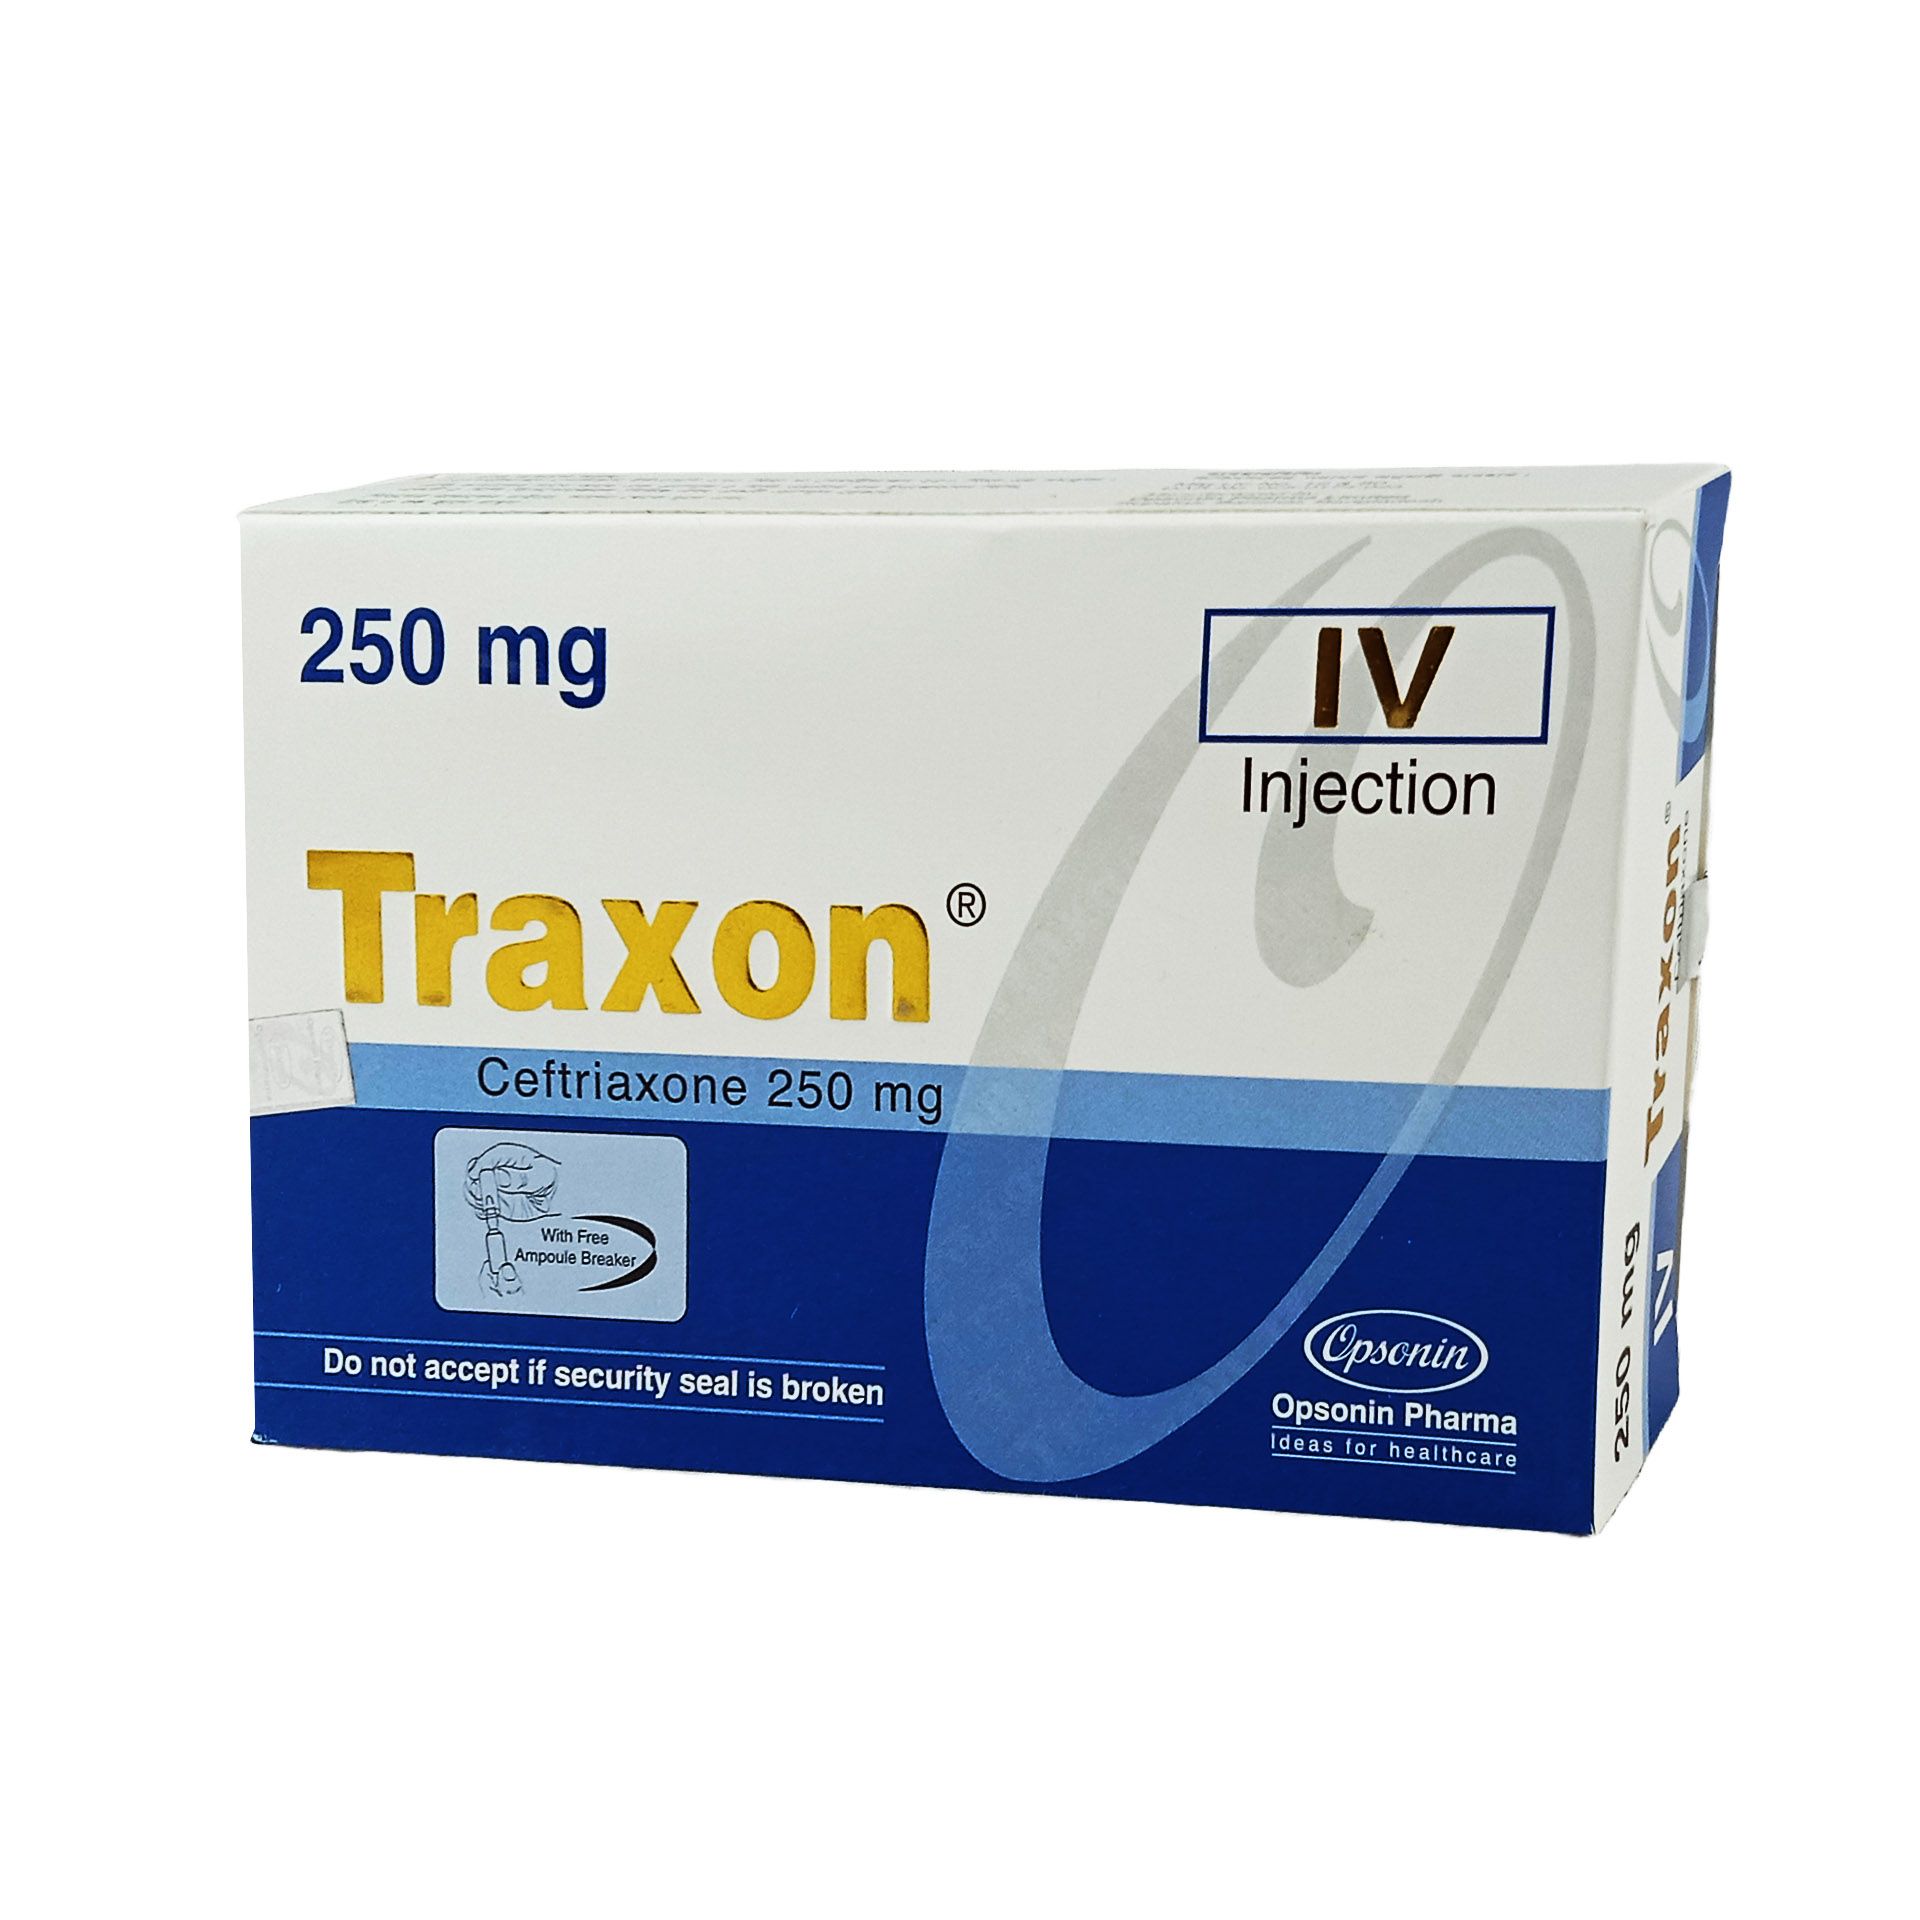 Traxon IV 250mg/vial Injection